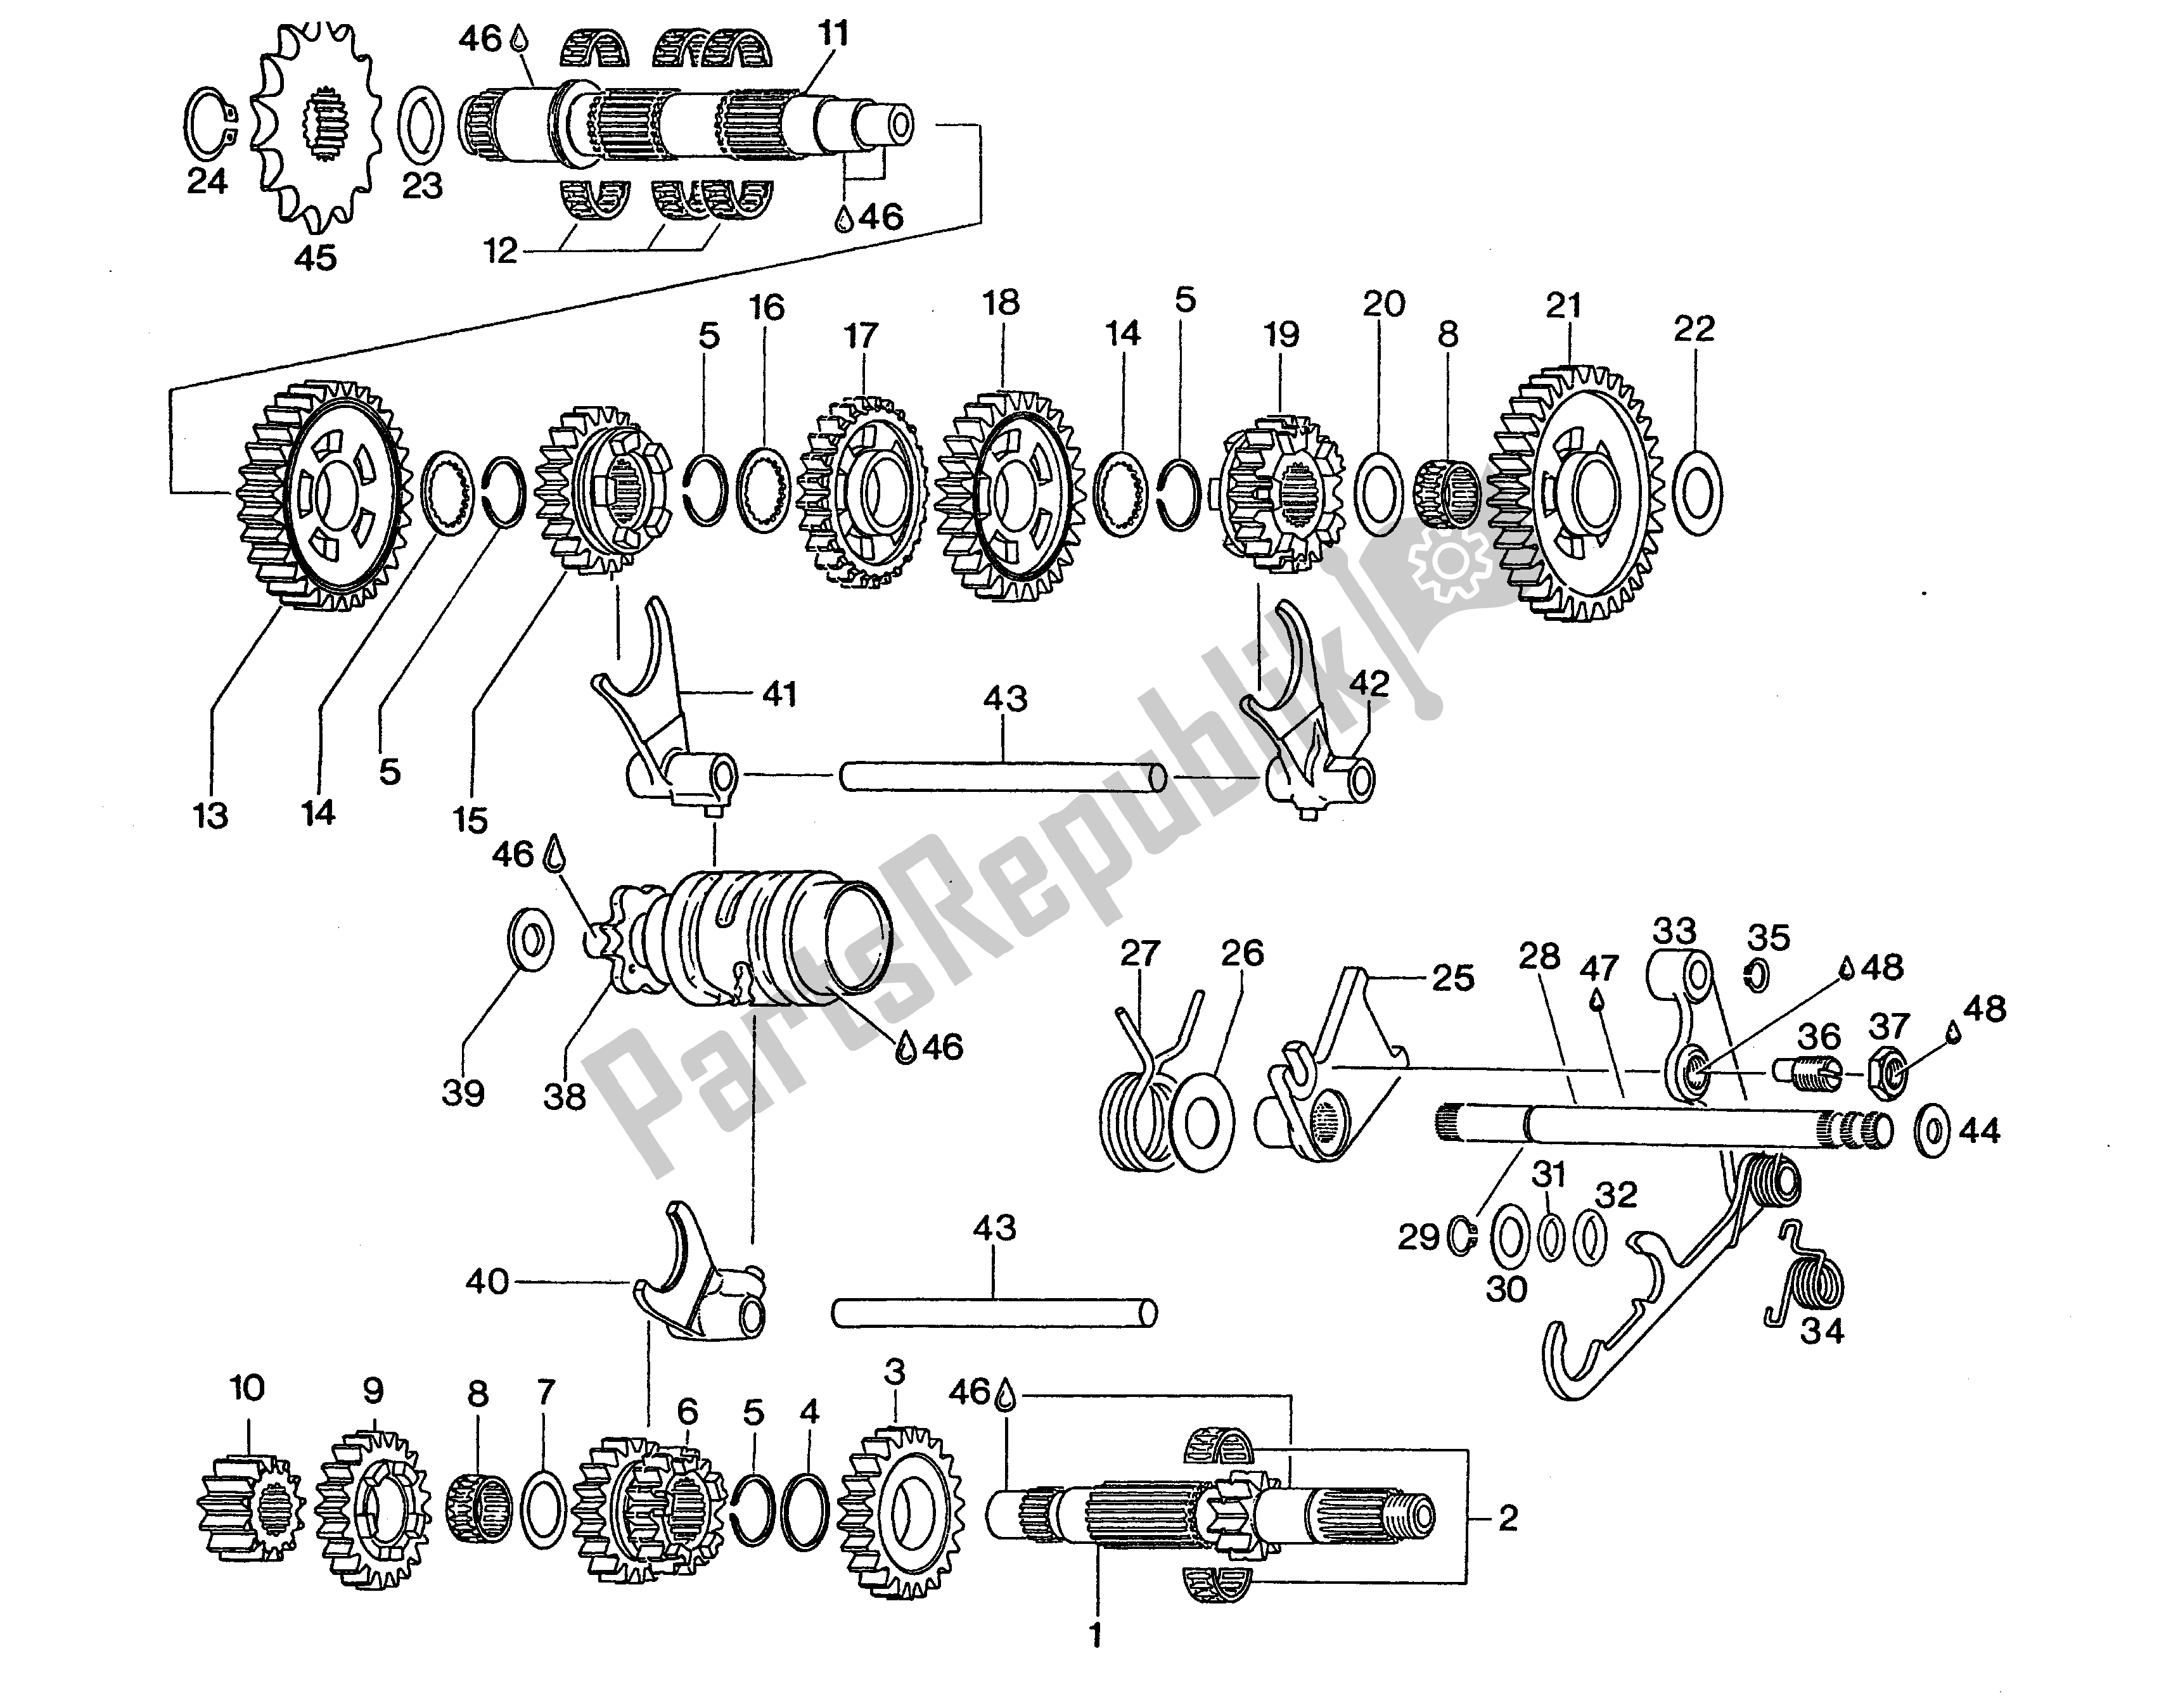 All parts for the 6-speed Transmission of the Aprilia Climber 280 1990